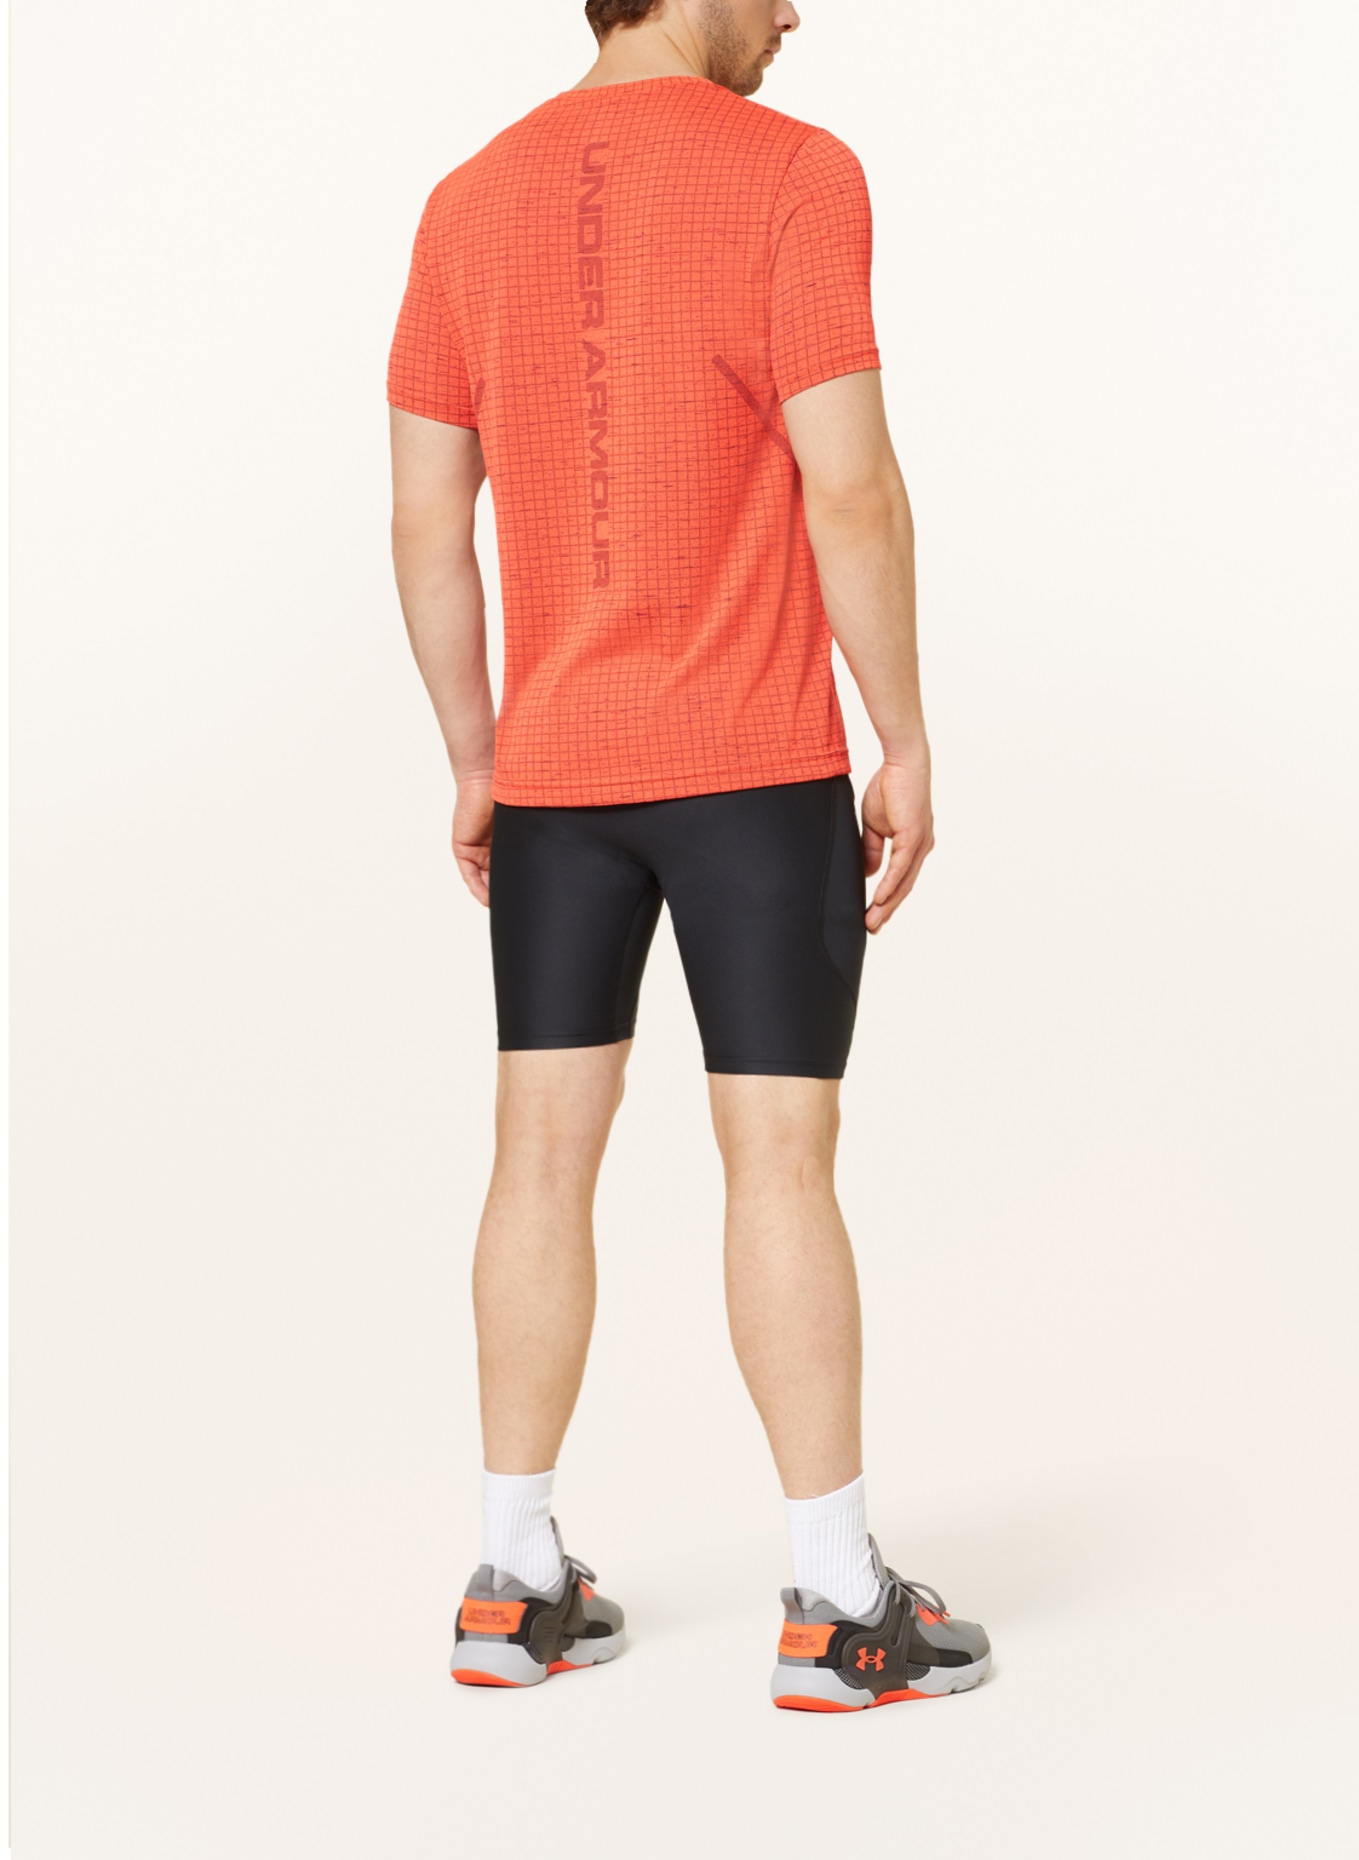 UNDER ARMOUR T-shirt SEAMLESS GRID with mesh, Color: RED/ BLACK (Image 3)